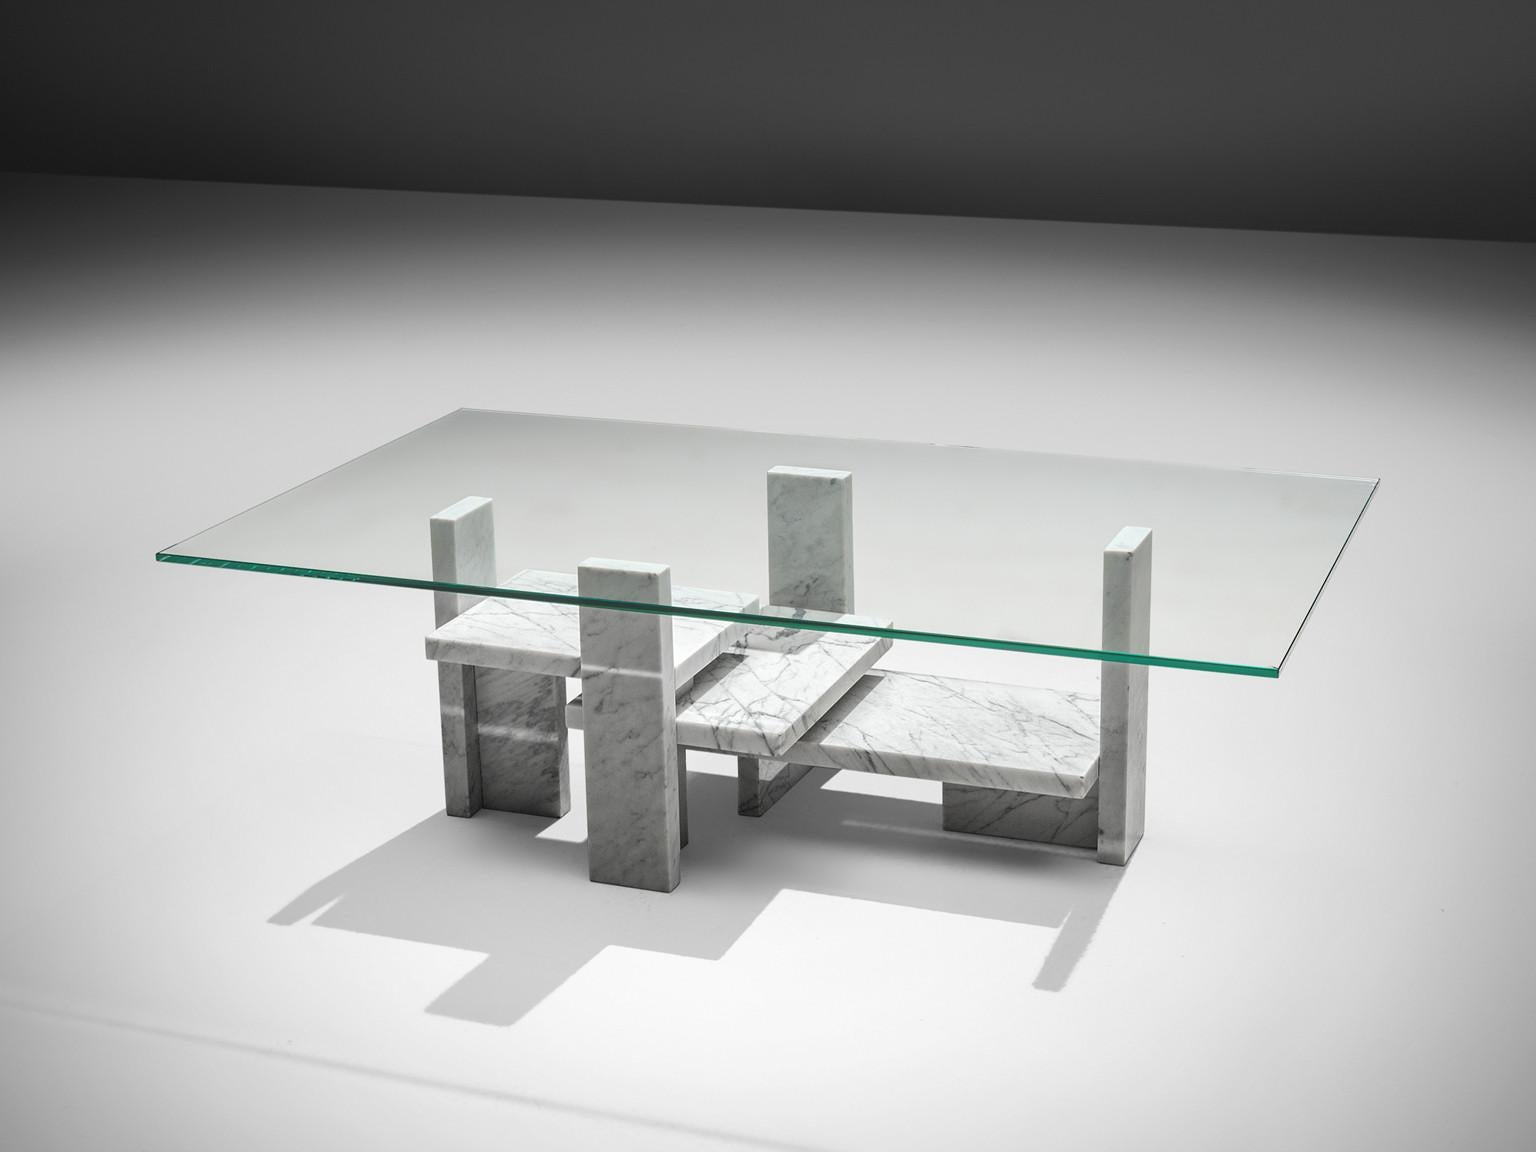 Willy Ballez, coffee table, marble and glass, Belgium, 1970.

This sculptural table is a skillful example of postmodern design by the Belgian designer Willy Ballez. The glass and marble table is architectural in its design is it is built up of